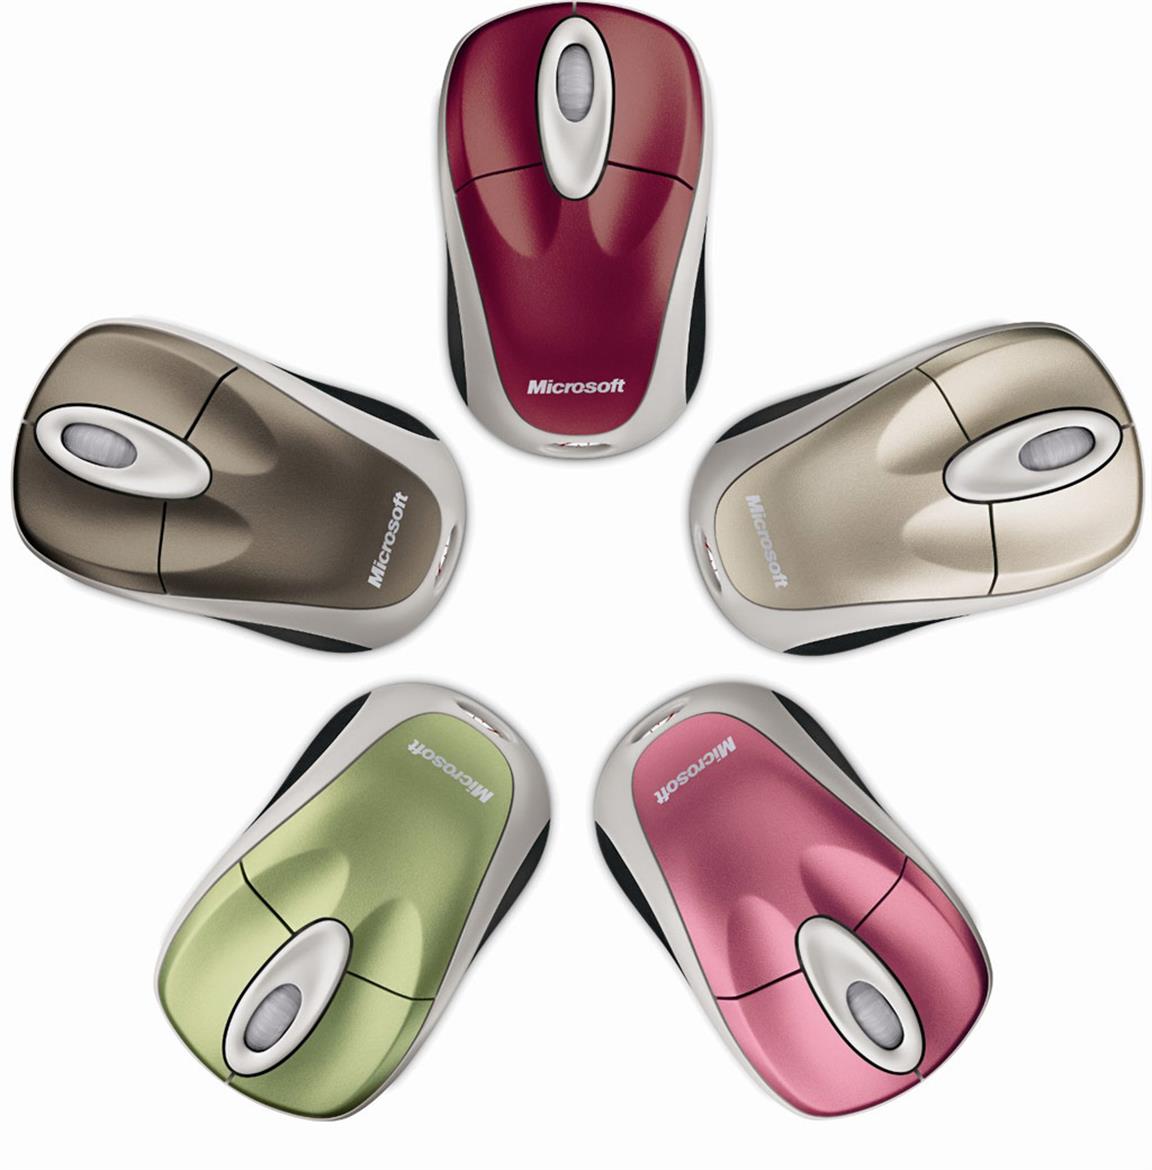 Which Hue Are You? MS Unveils New Mouse Colors